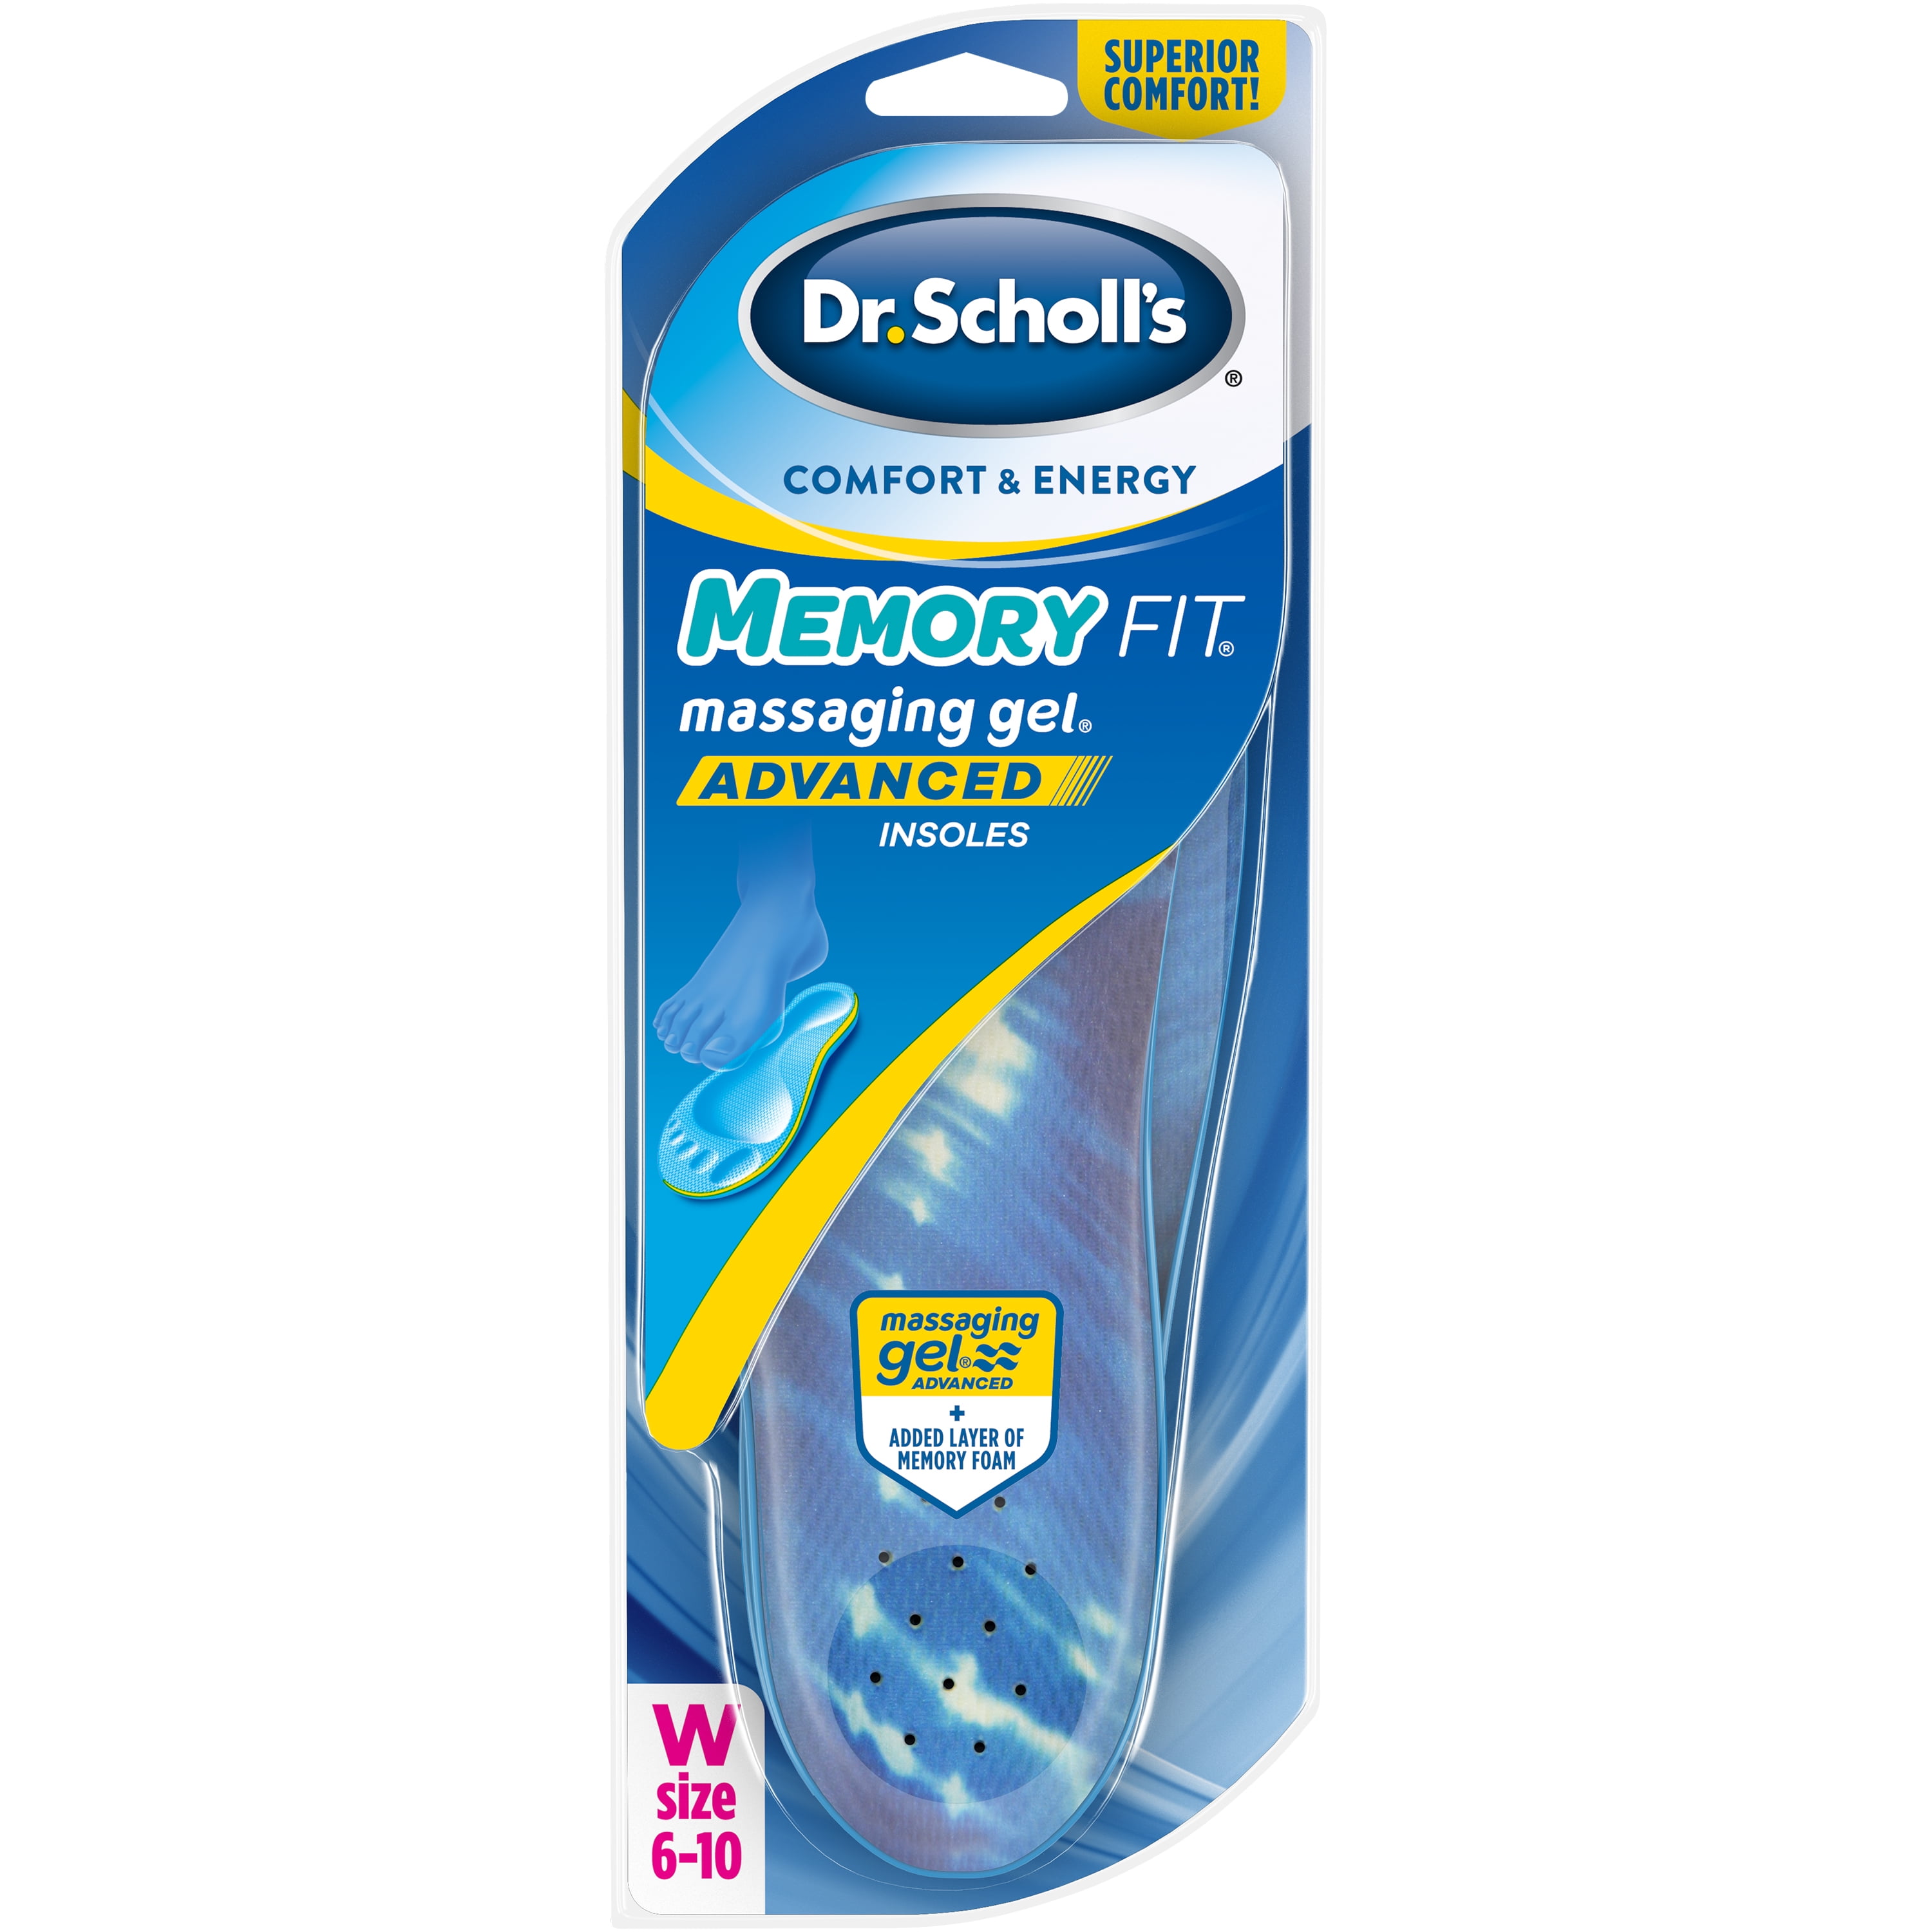 Dr. Scholl's MEMORY FIT Insoles with 